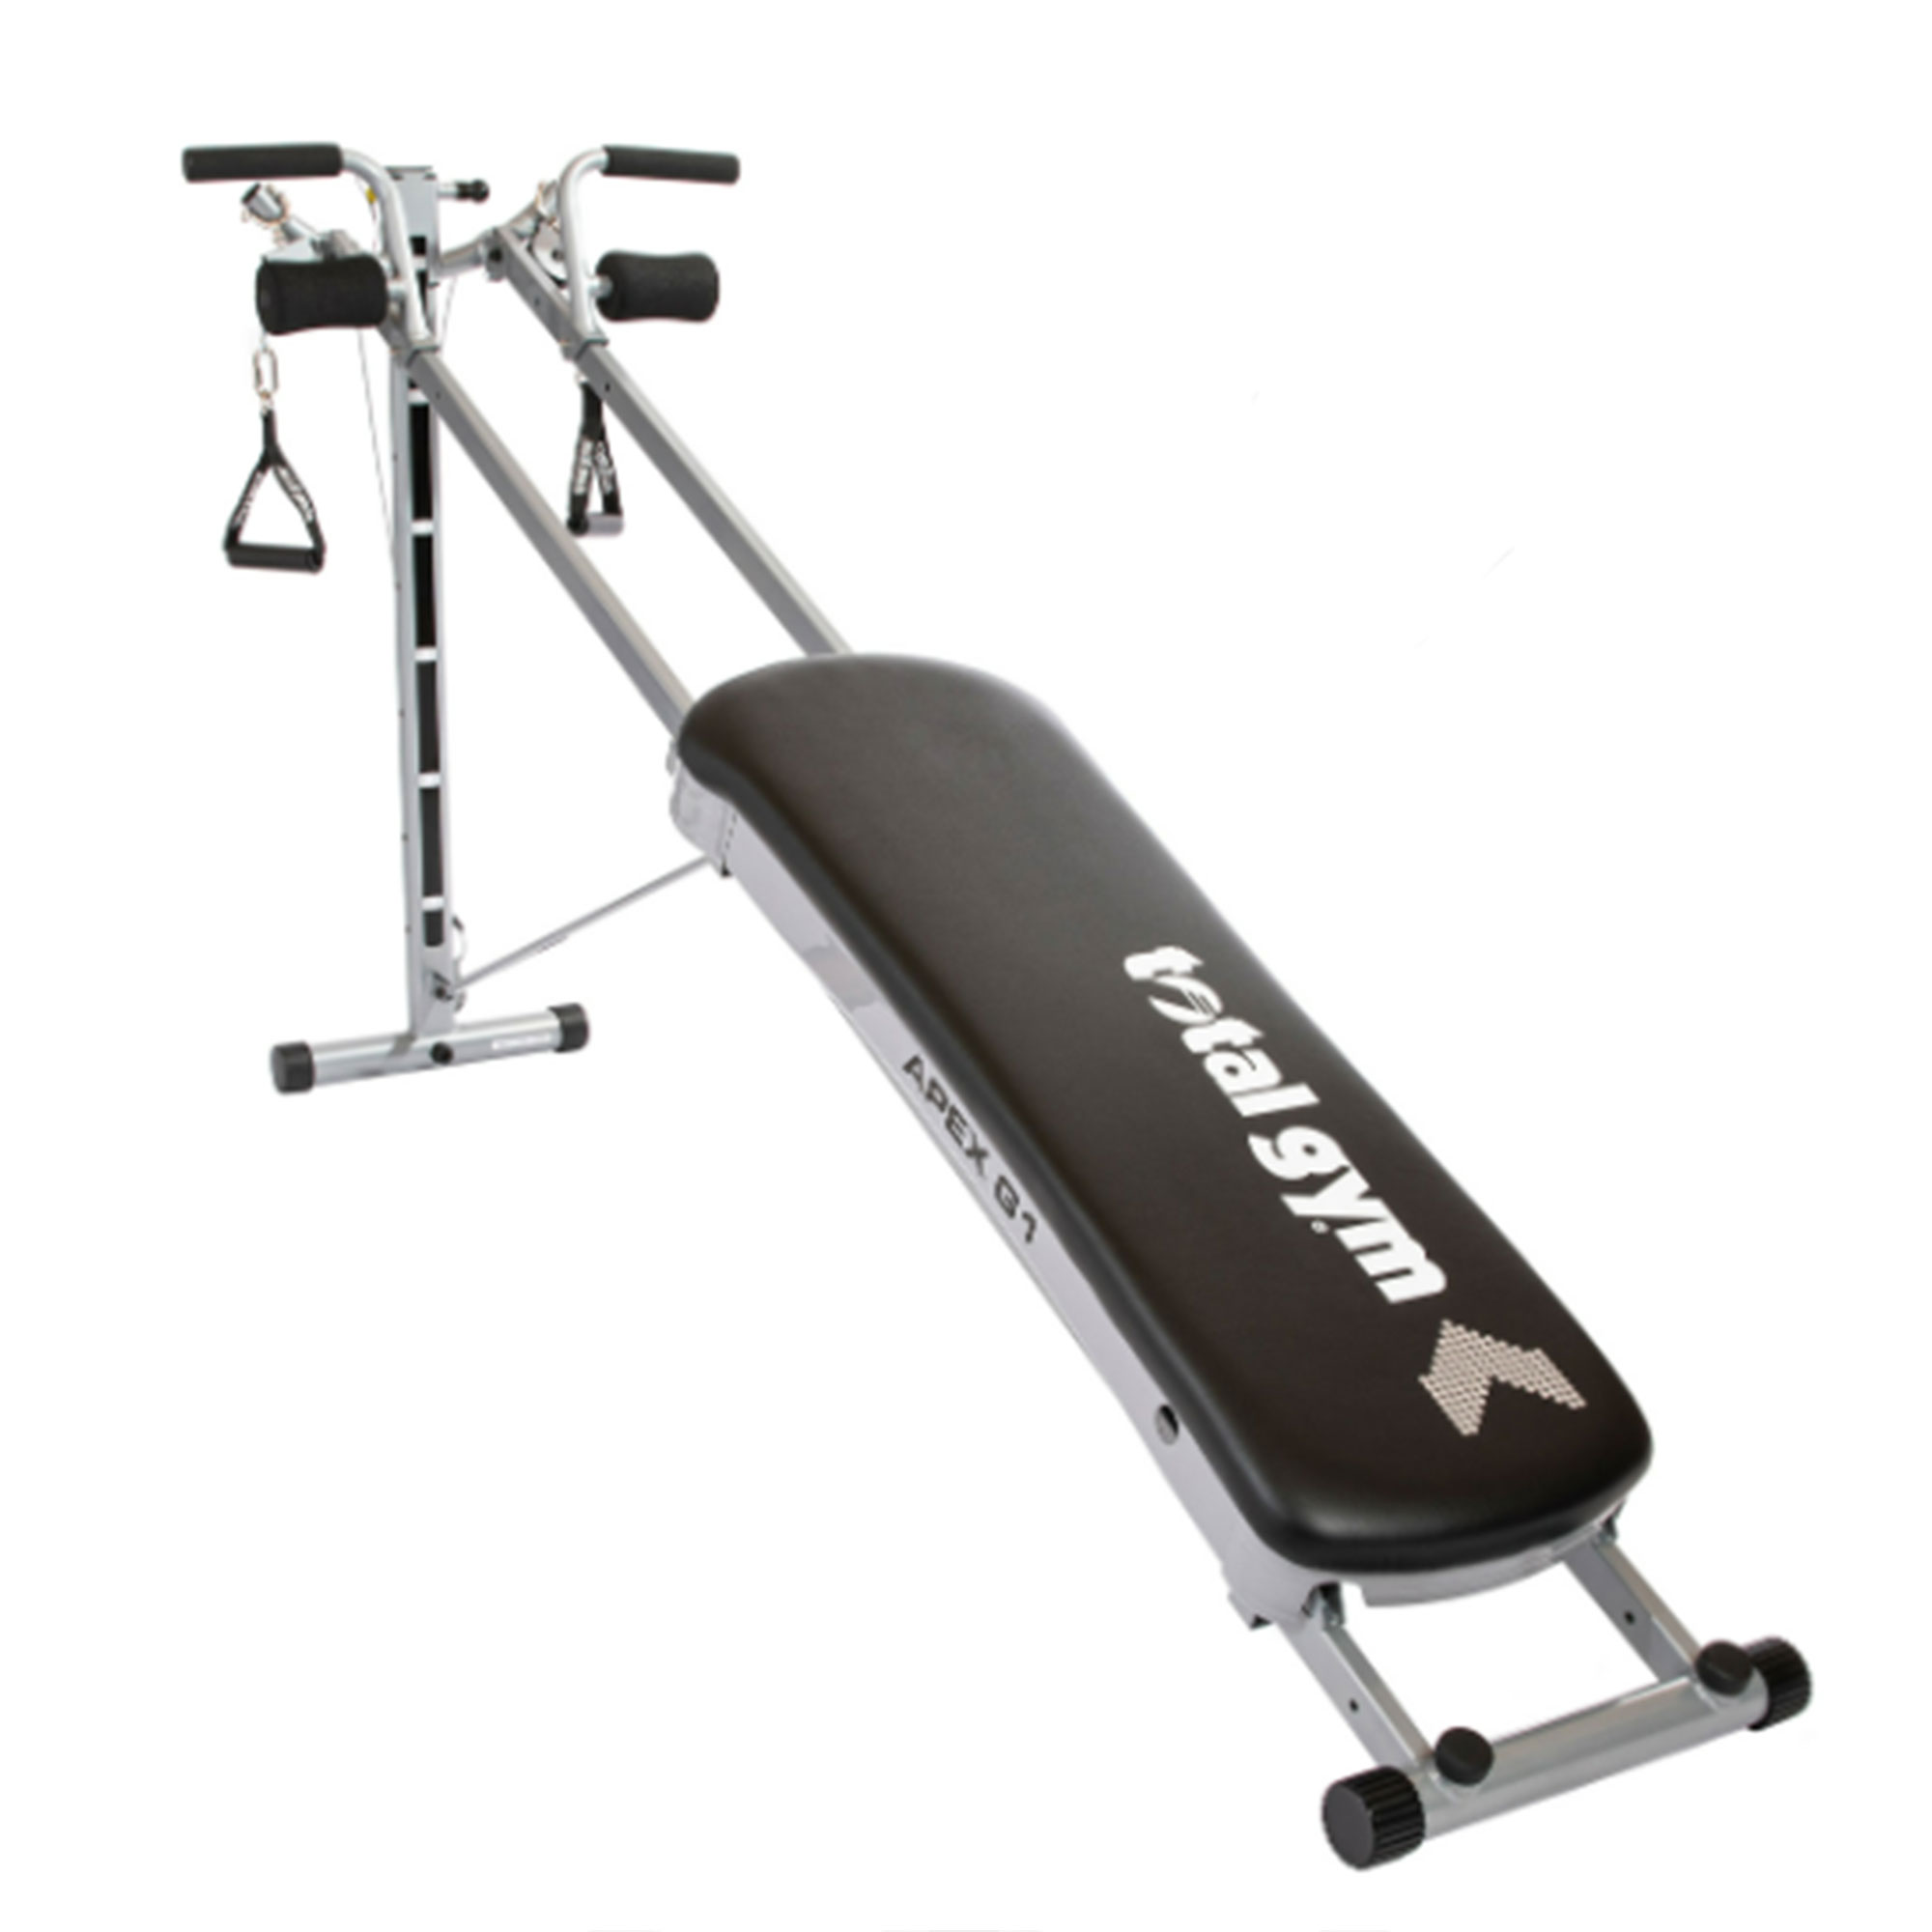 Total Gym APEX G1 Home Fitness Incline Weight Training w/Resistance Levels - image 1 of 12